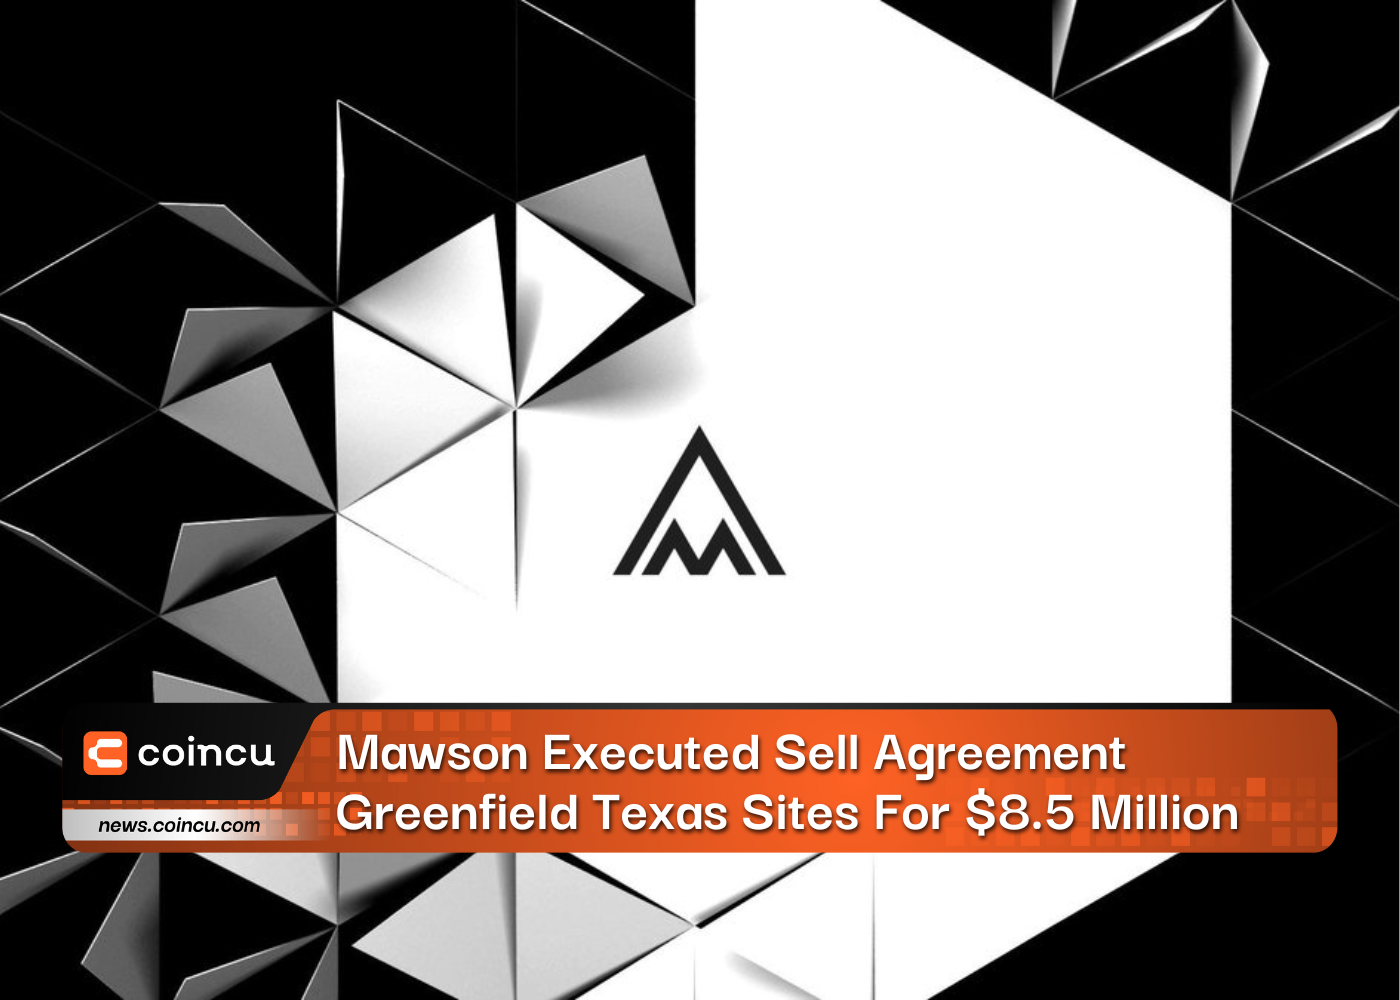 Mawson Executed Sell Agreement Greenfield Texas Sites For $8.5 Million